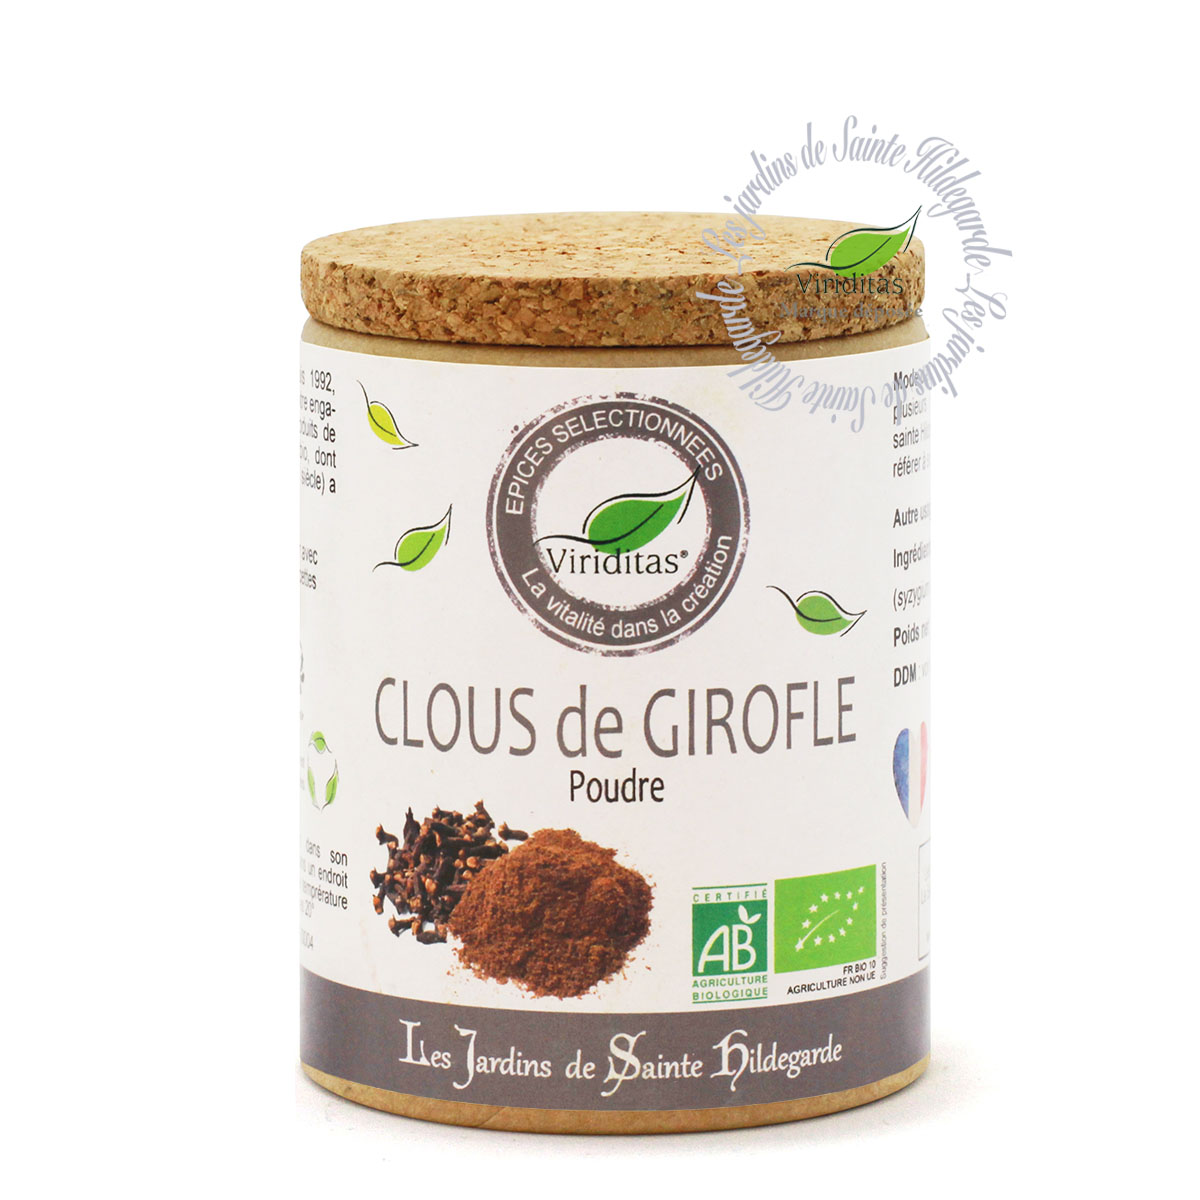 CLOUS DE GIROFLE ENTIERS – day by day l'éco-drive Strasbourg